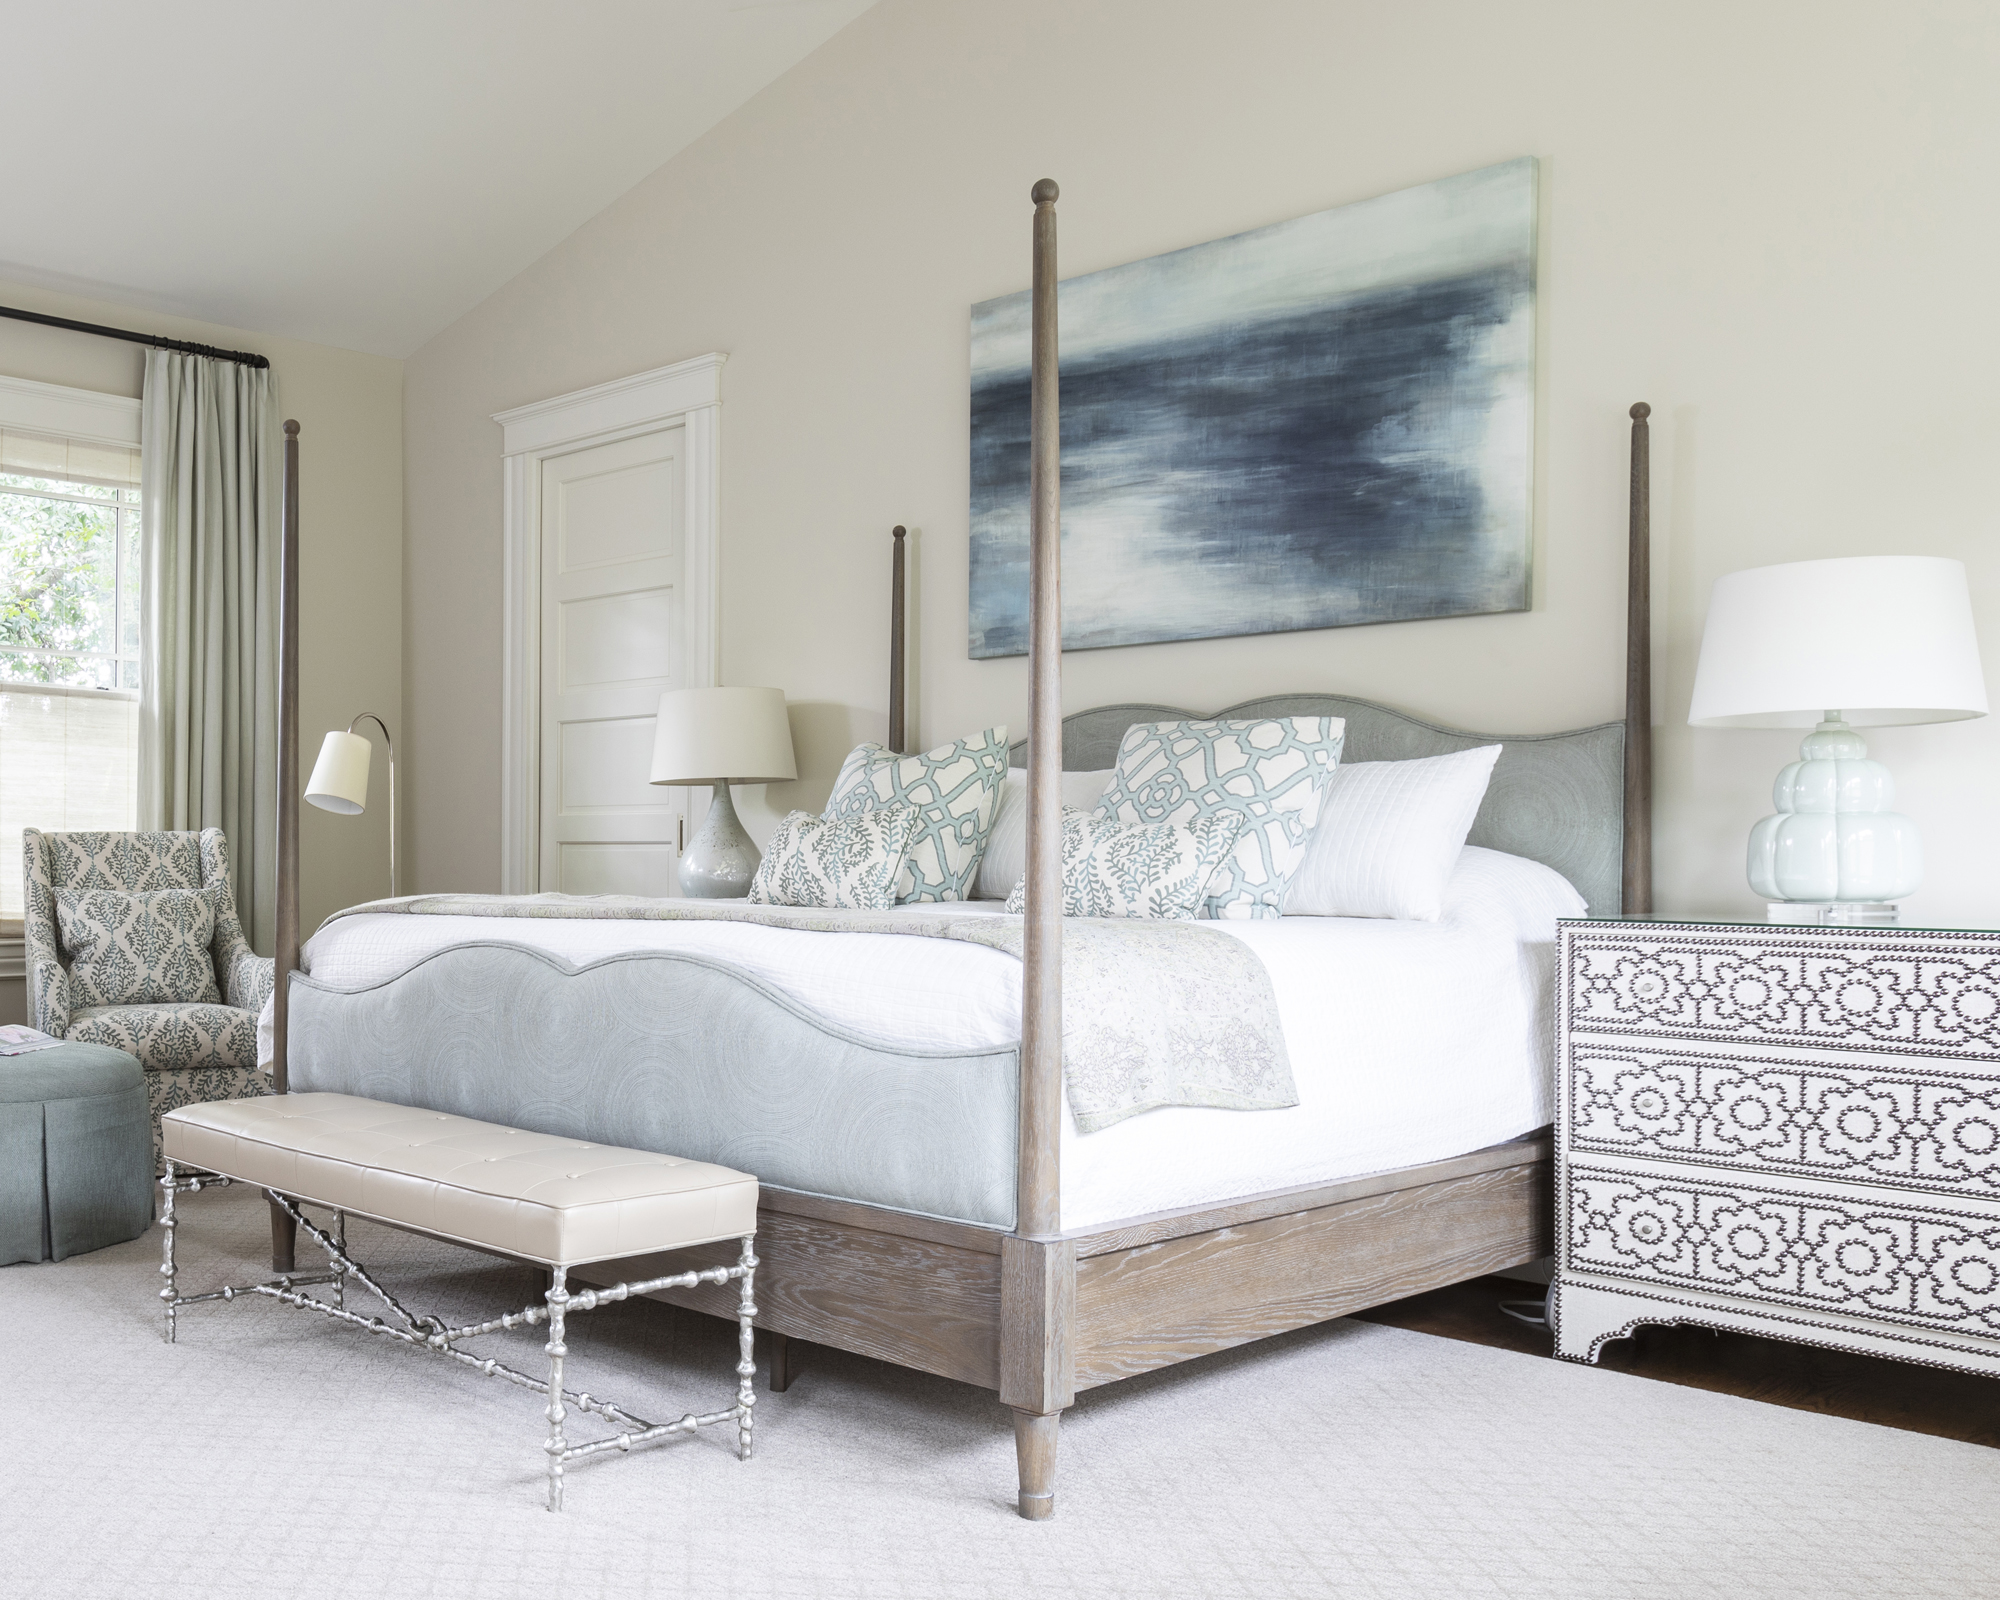 A bedroom with pale blue bed linen and pale wood four poster bed illustrating simple bedroom ideas.